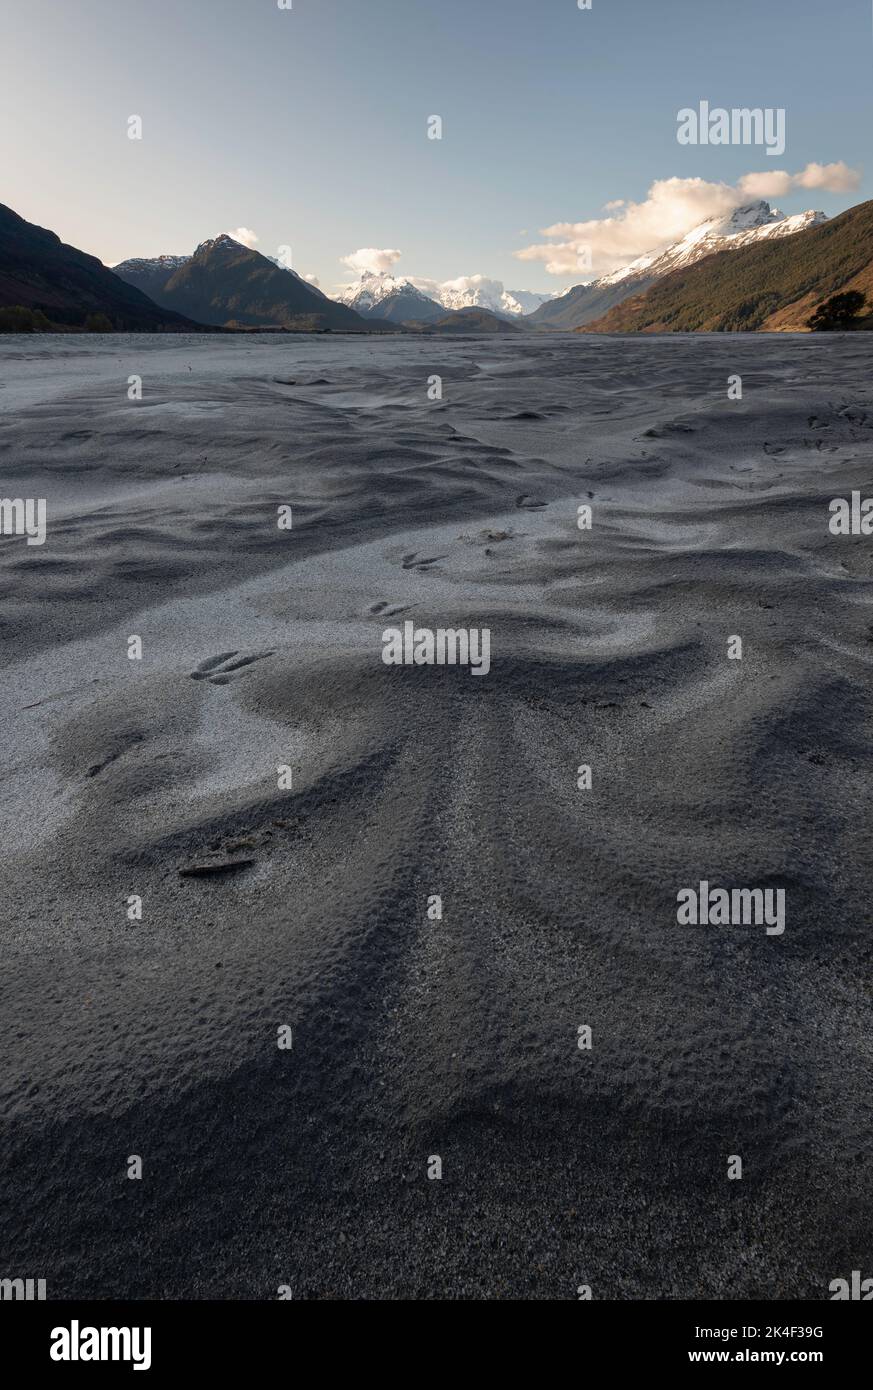 Delicate patterns of rock silt line the the Dart River in Glenorchy, known famously for the filming location of Isengard in the Lord of the Rings. Stock Photo